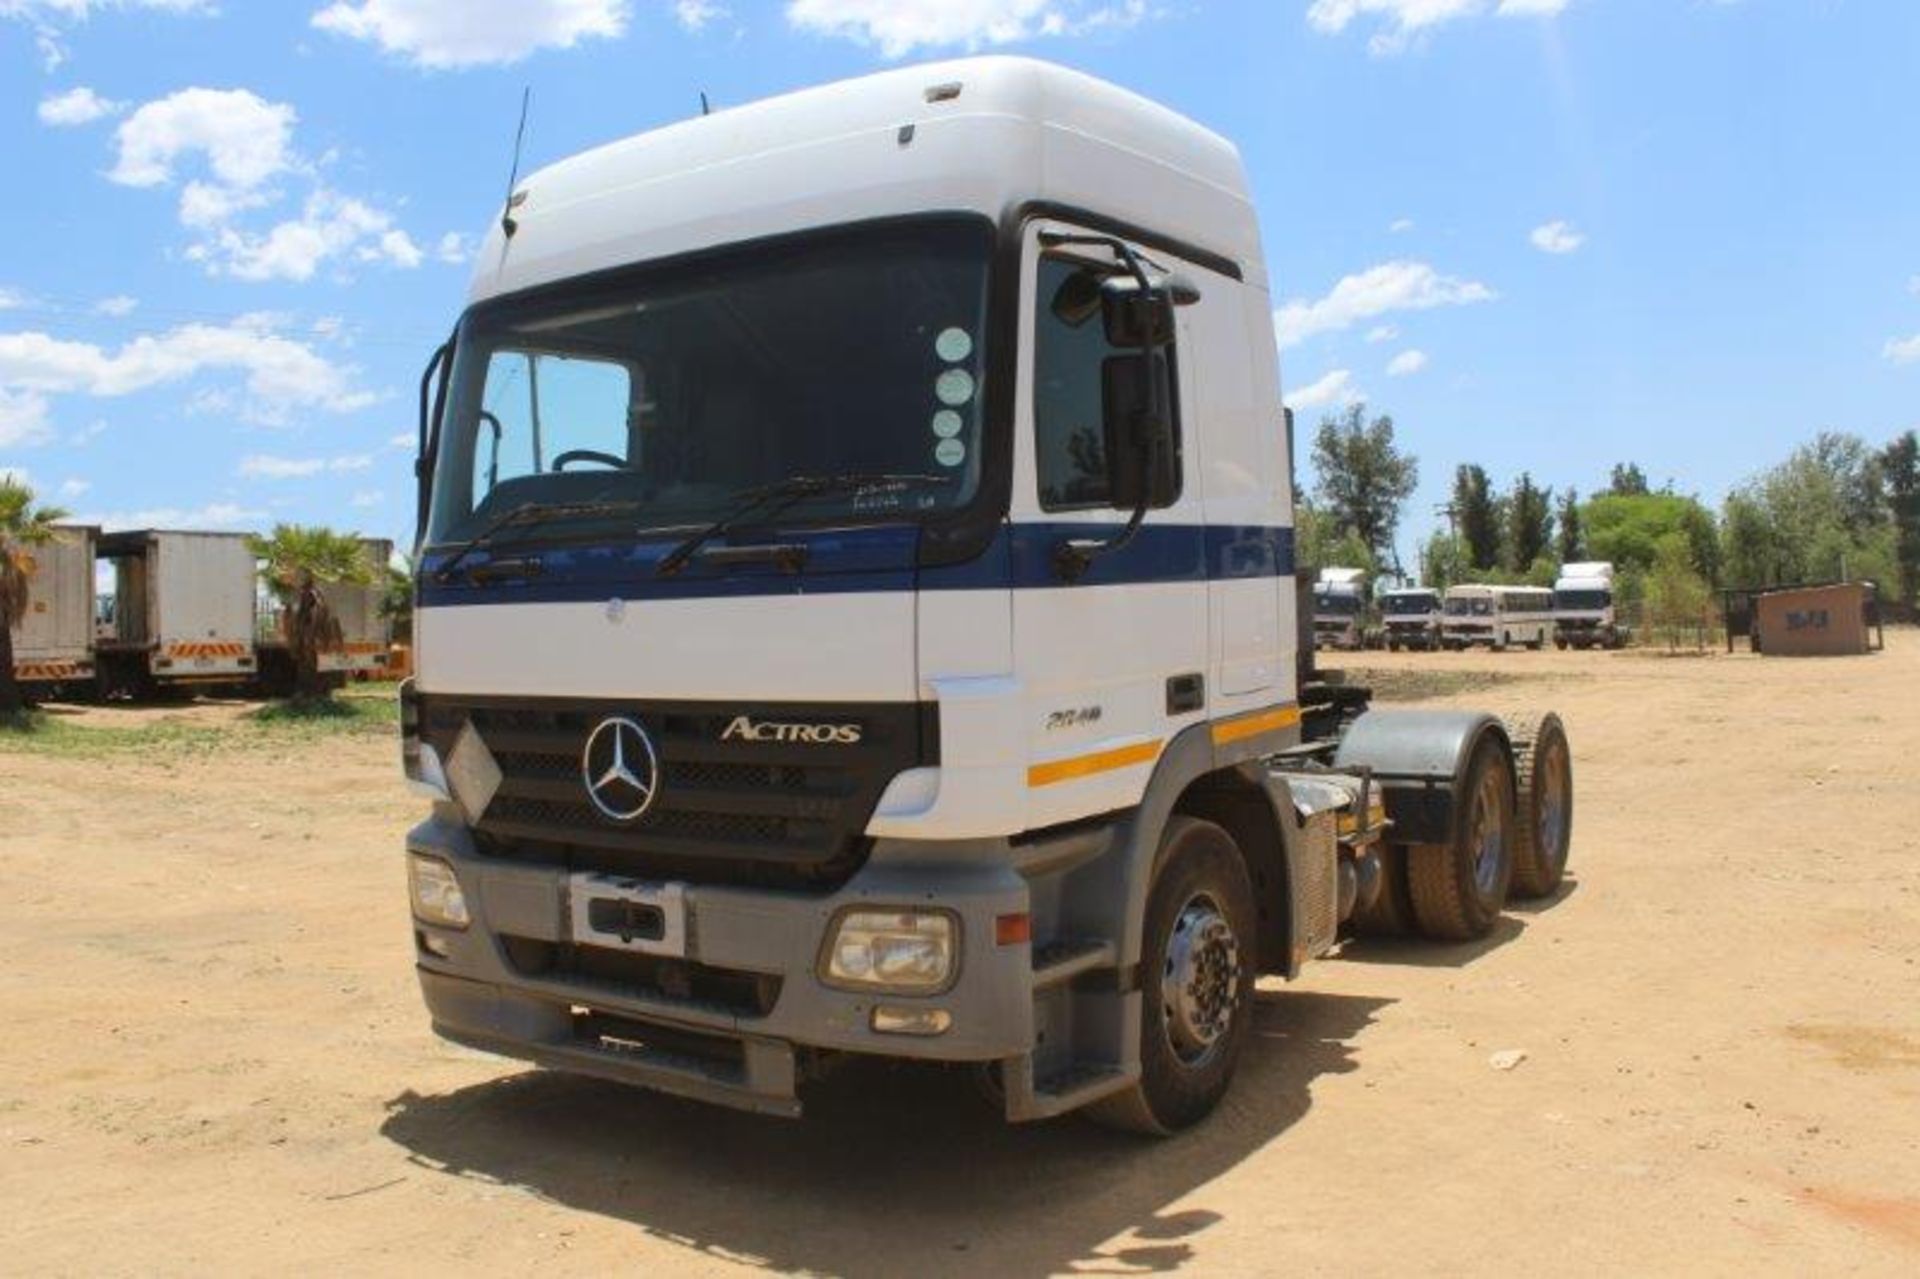 M/BENZ ACTROS 2648 HORSE - Image 2 of 8